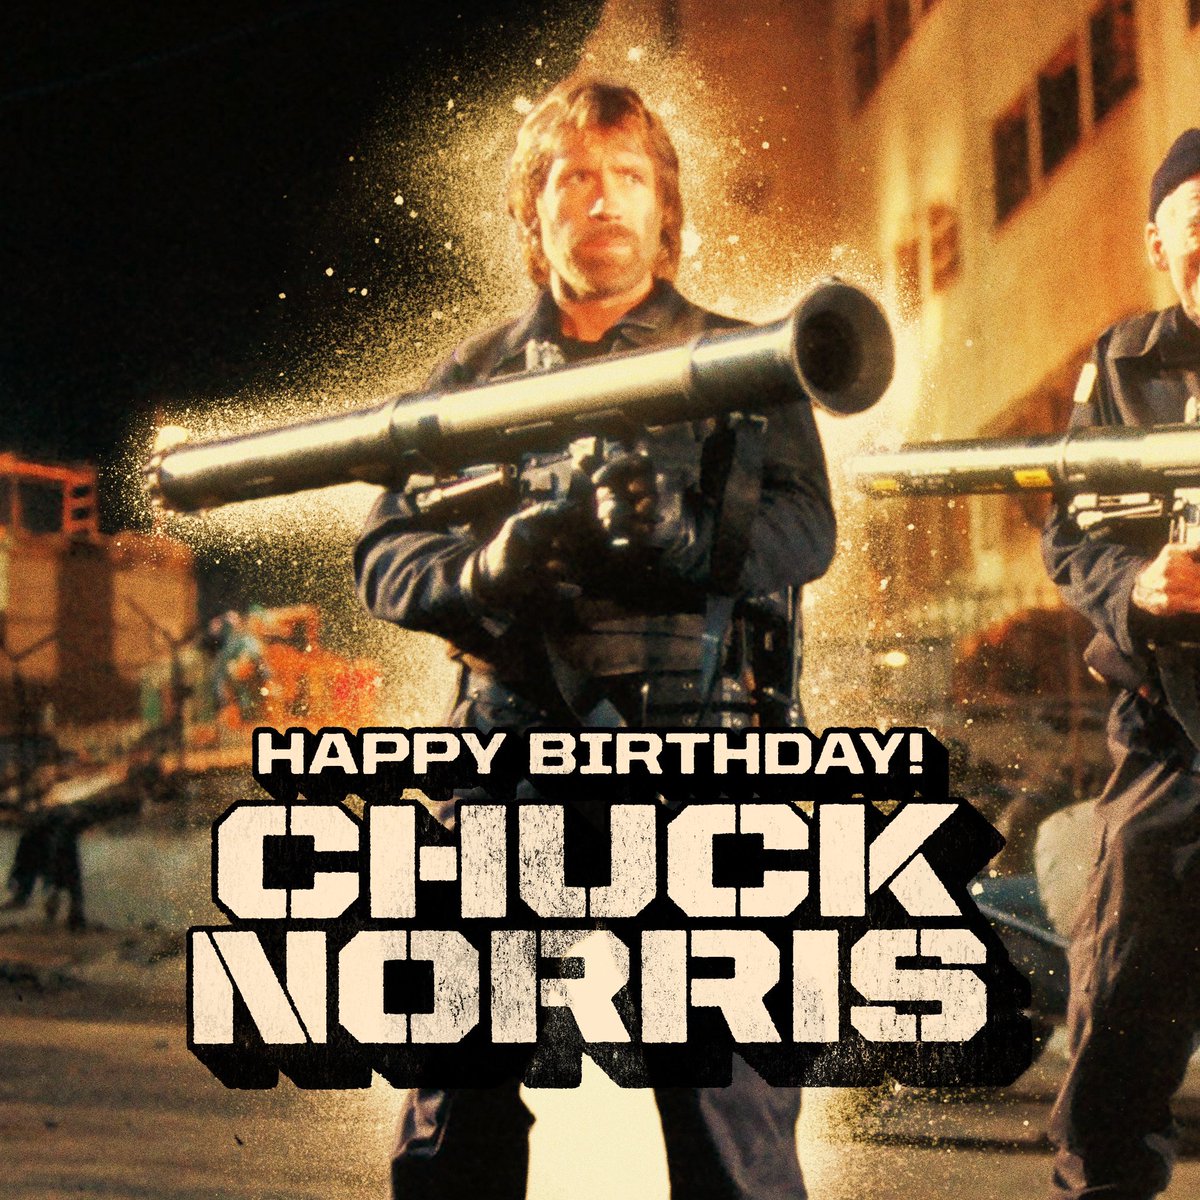 #HappyBirthday to the martial arts legend, action movie icon, and hero of the internet @ChuckNorris!